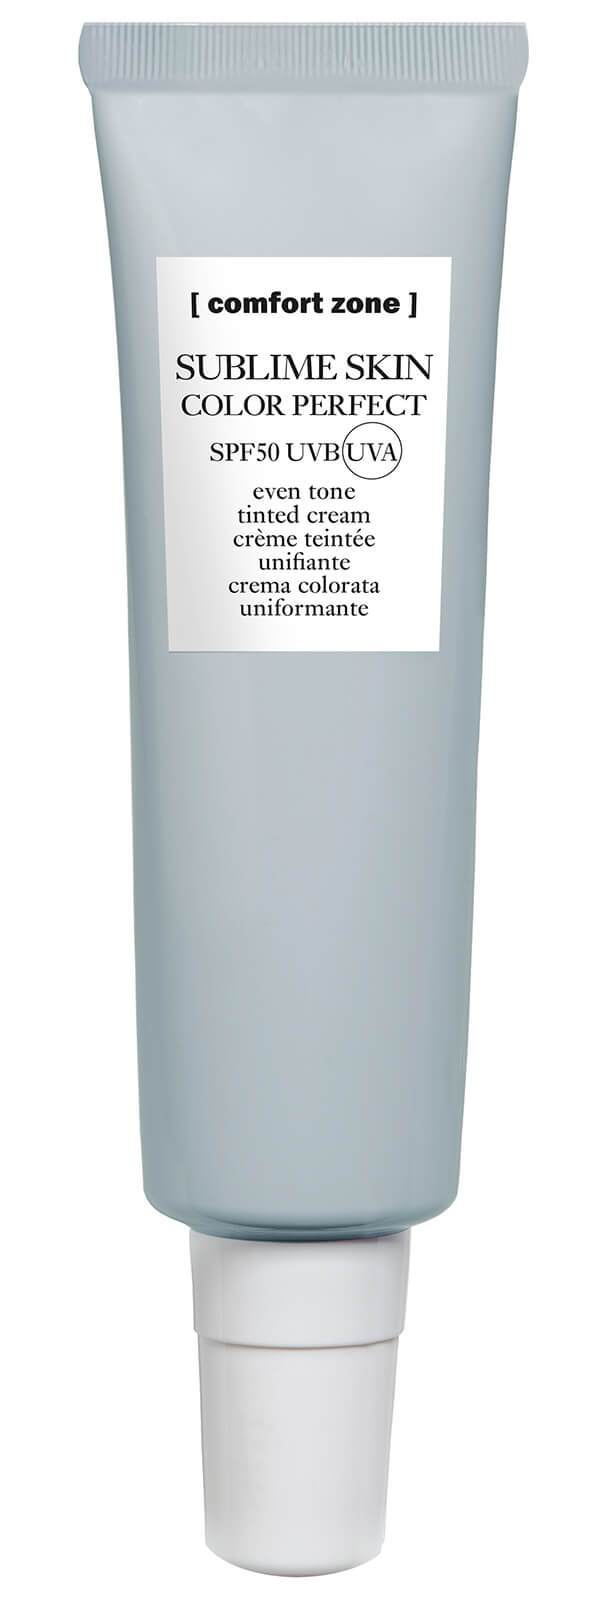 Comfort Zone Sublime Skin Color Perfect SPF 50